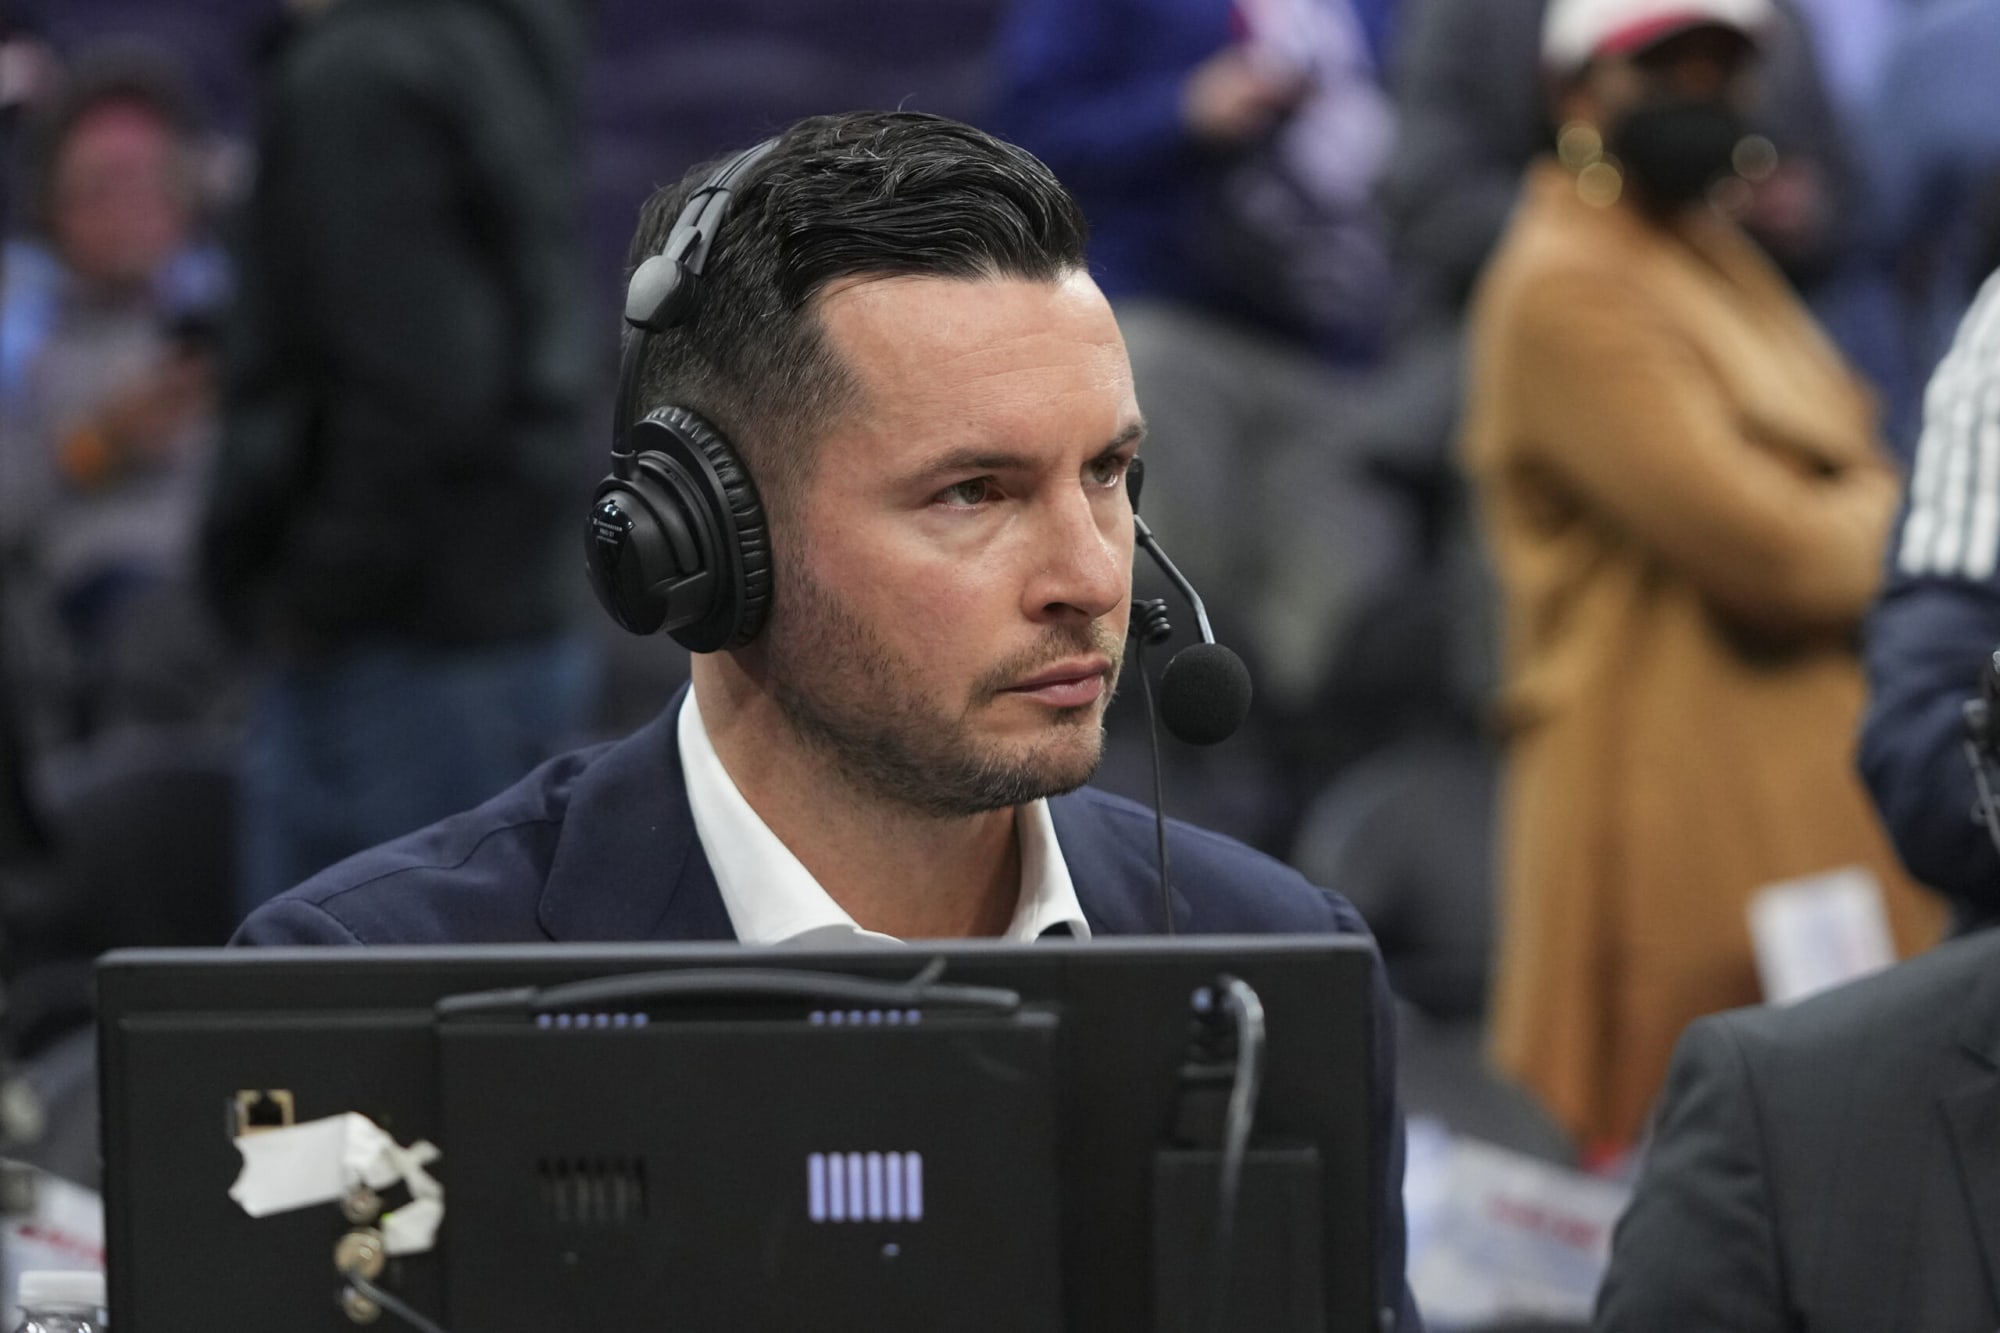 JJ Redick reveals how close he came to going to Florida before committing  to Duke